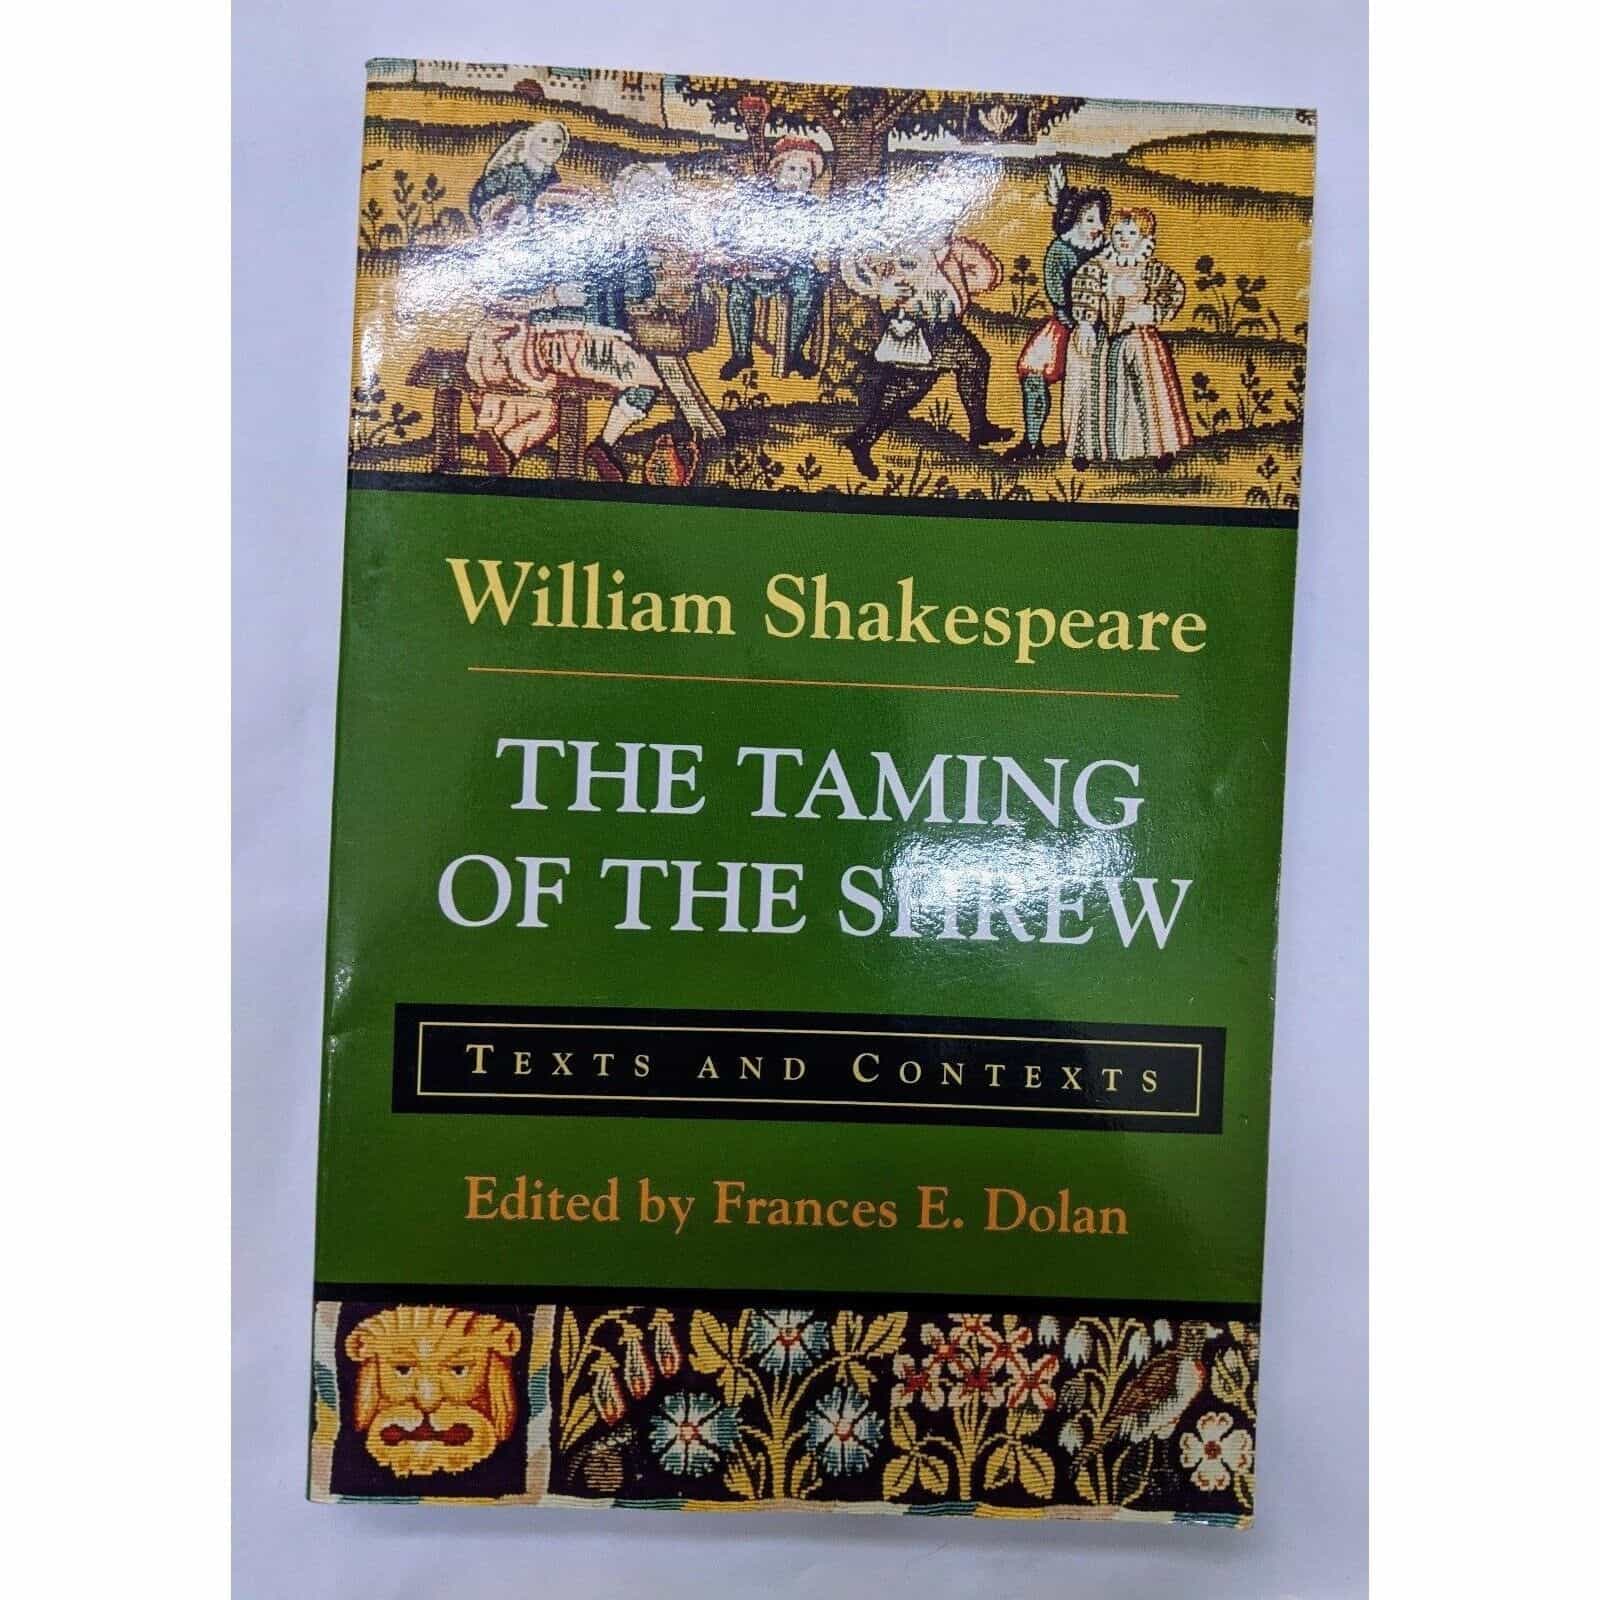 The Taming Of The Shrew by William Shakespeare edited by Frances E. Dolan Book